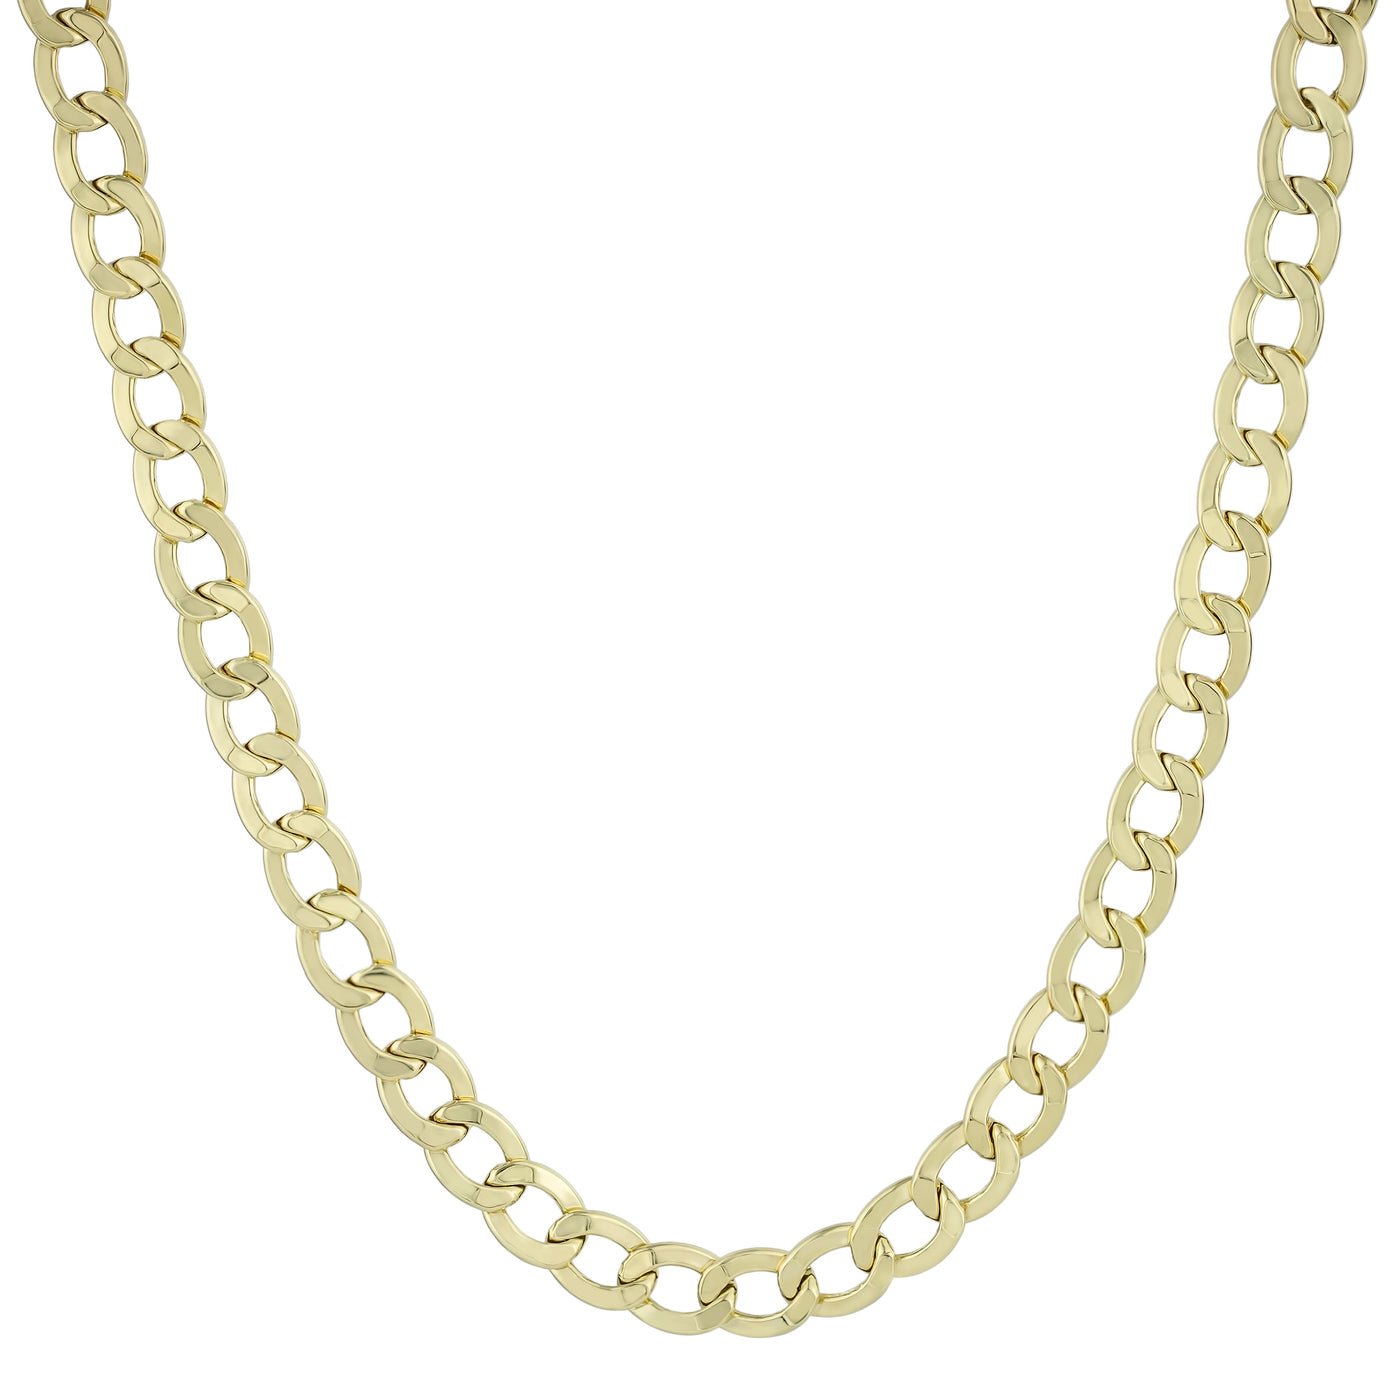 Women's Miami Curb Chain 14K Yellow Gold - Hollow